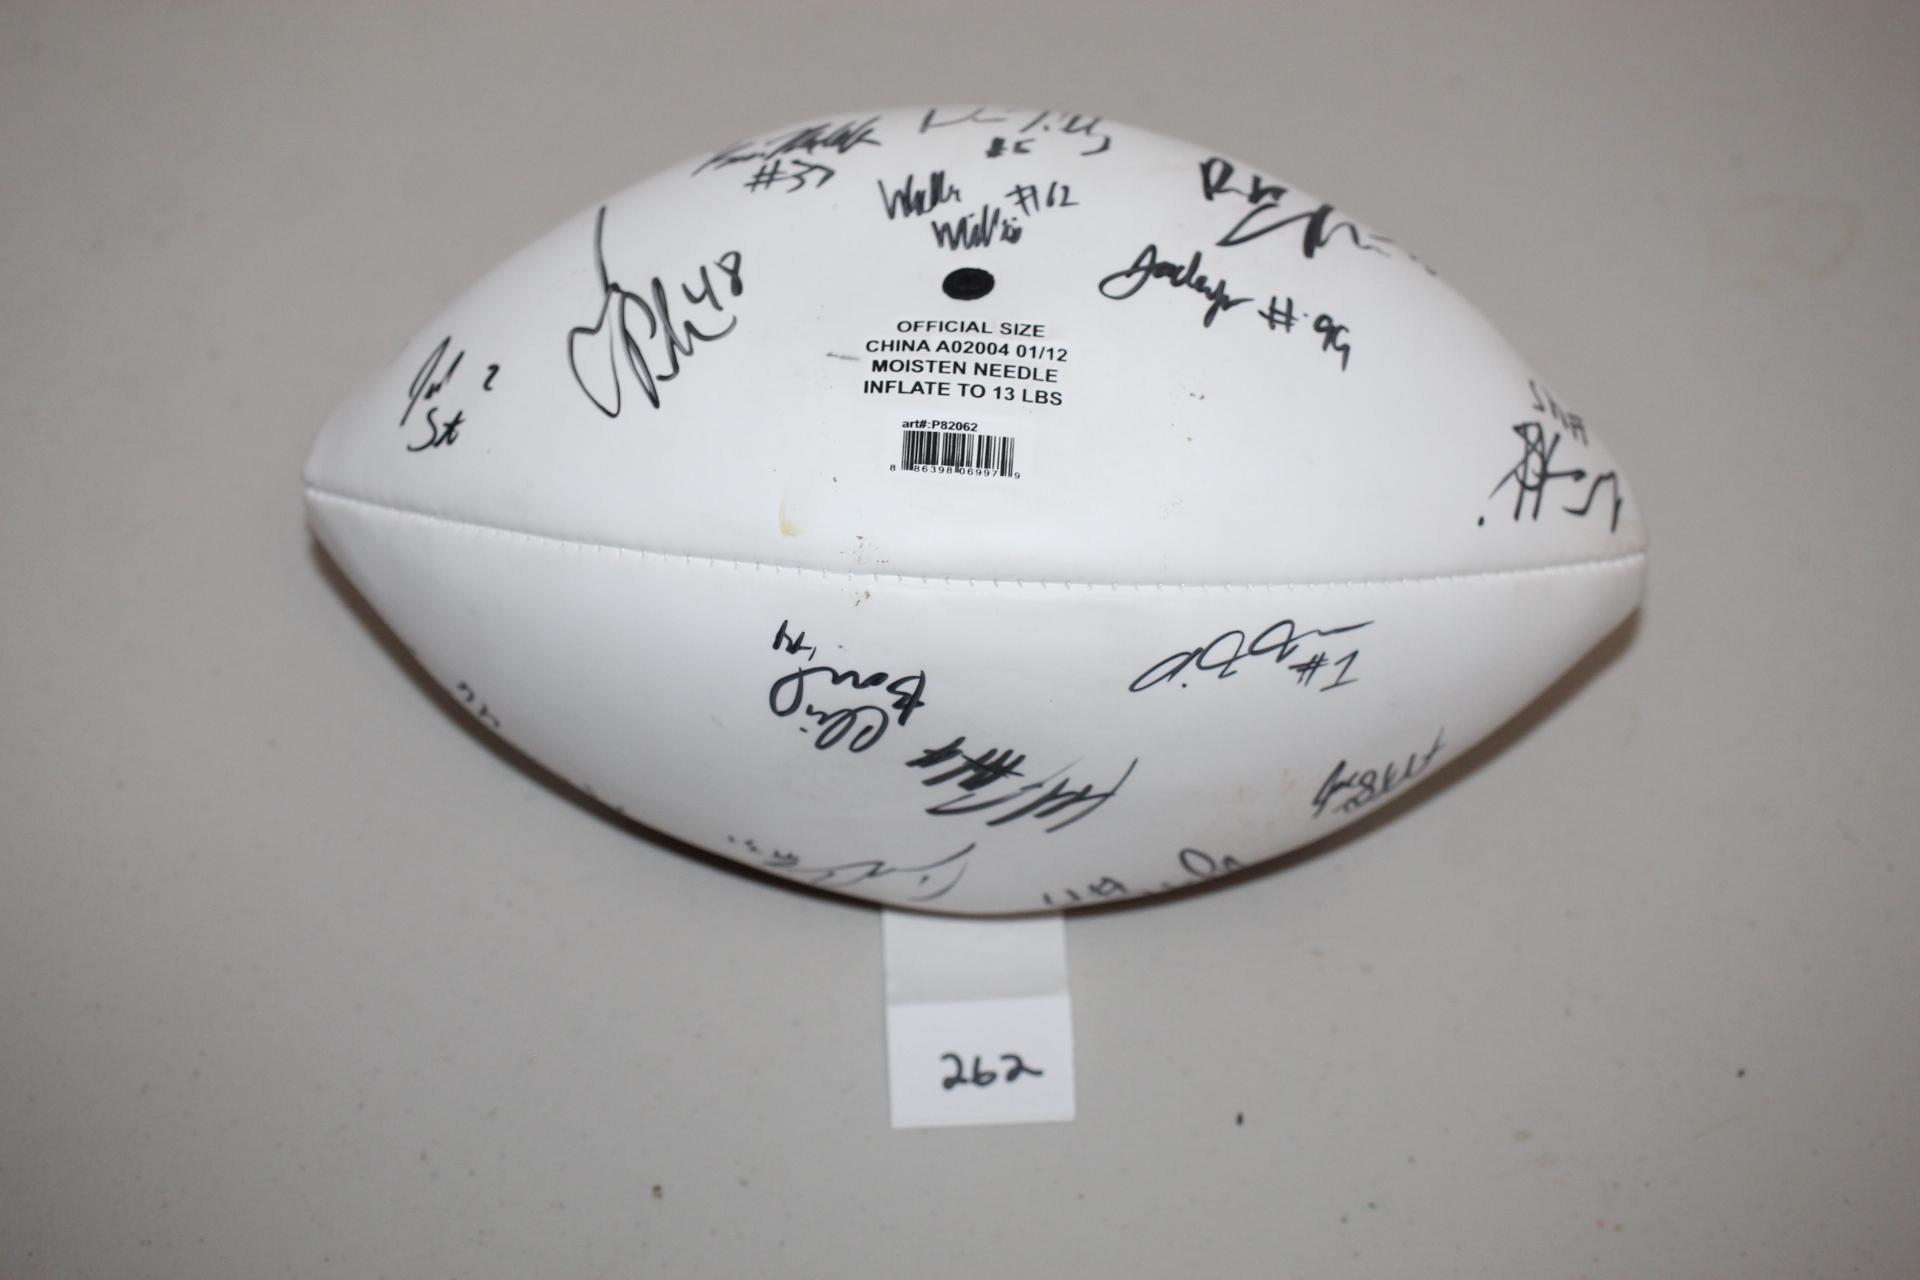 Signed Wisconsin Badgers Football, No COA, Official Size, Adidas